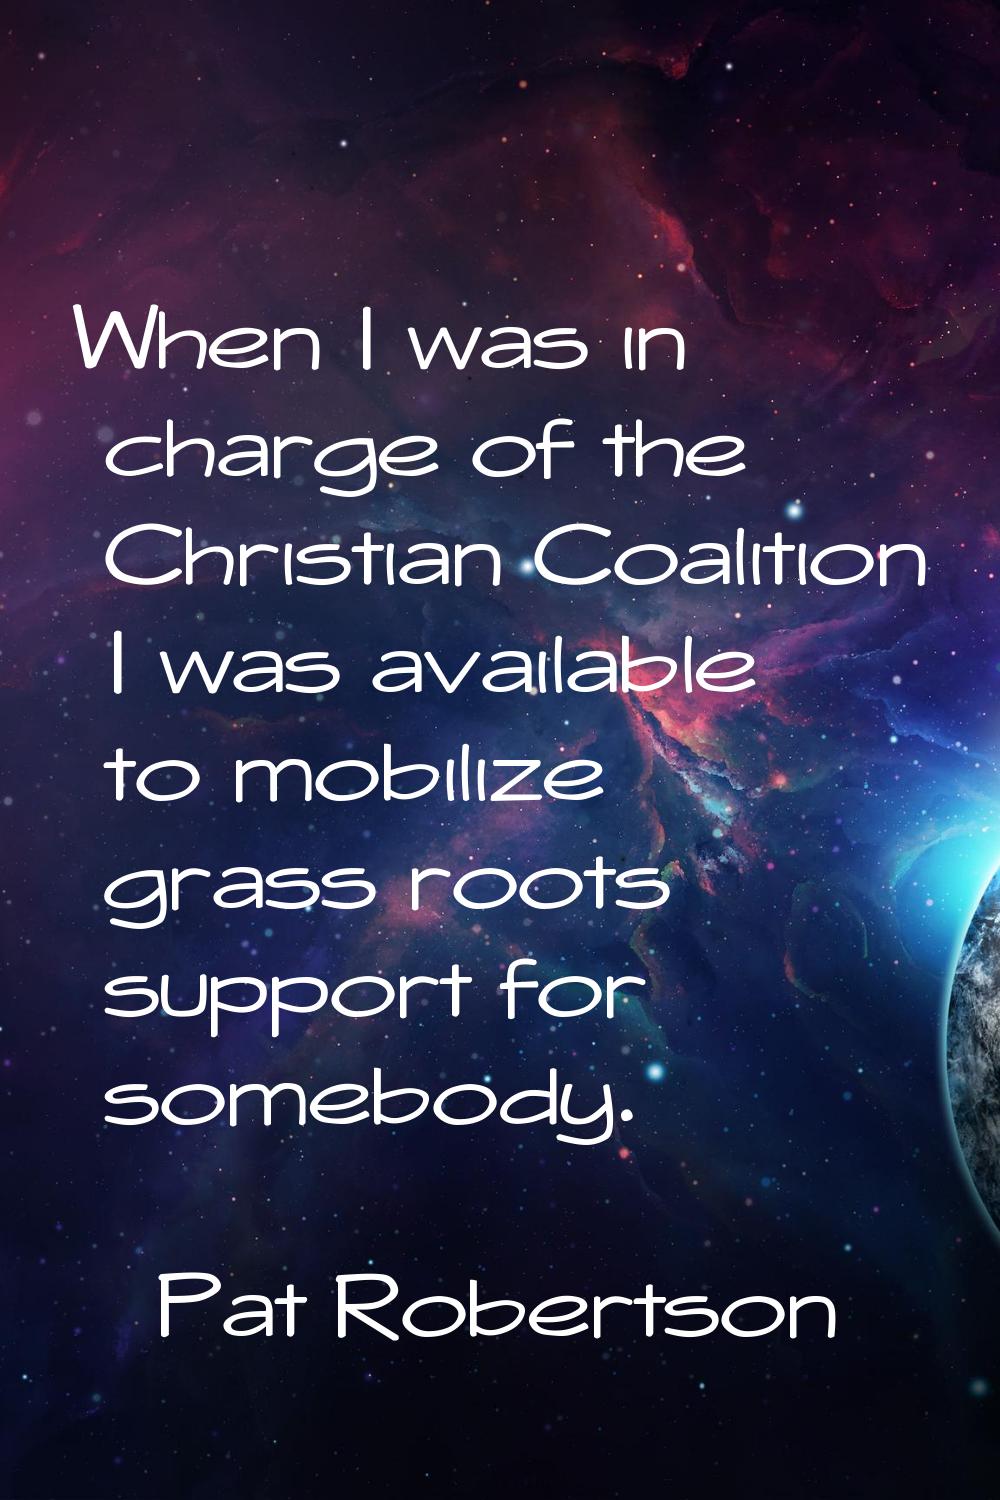 When I was in charge of the Christian Coalition I was available to mobilize grass roots support for